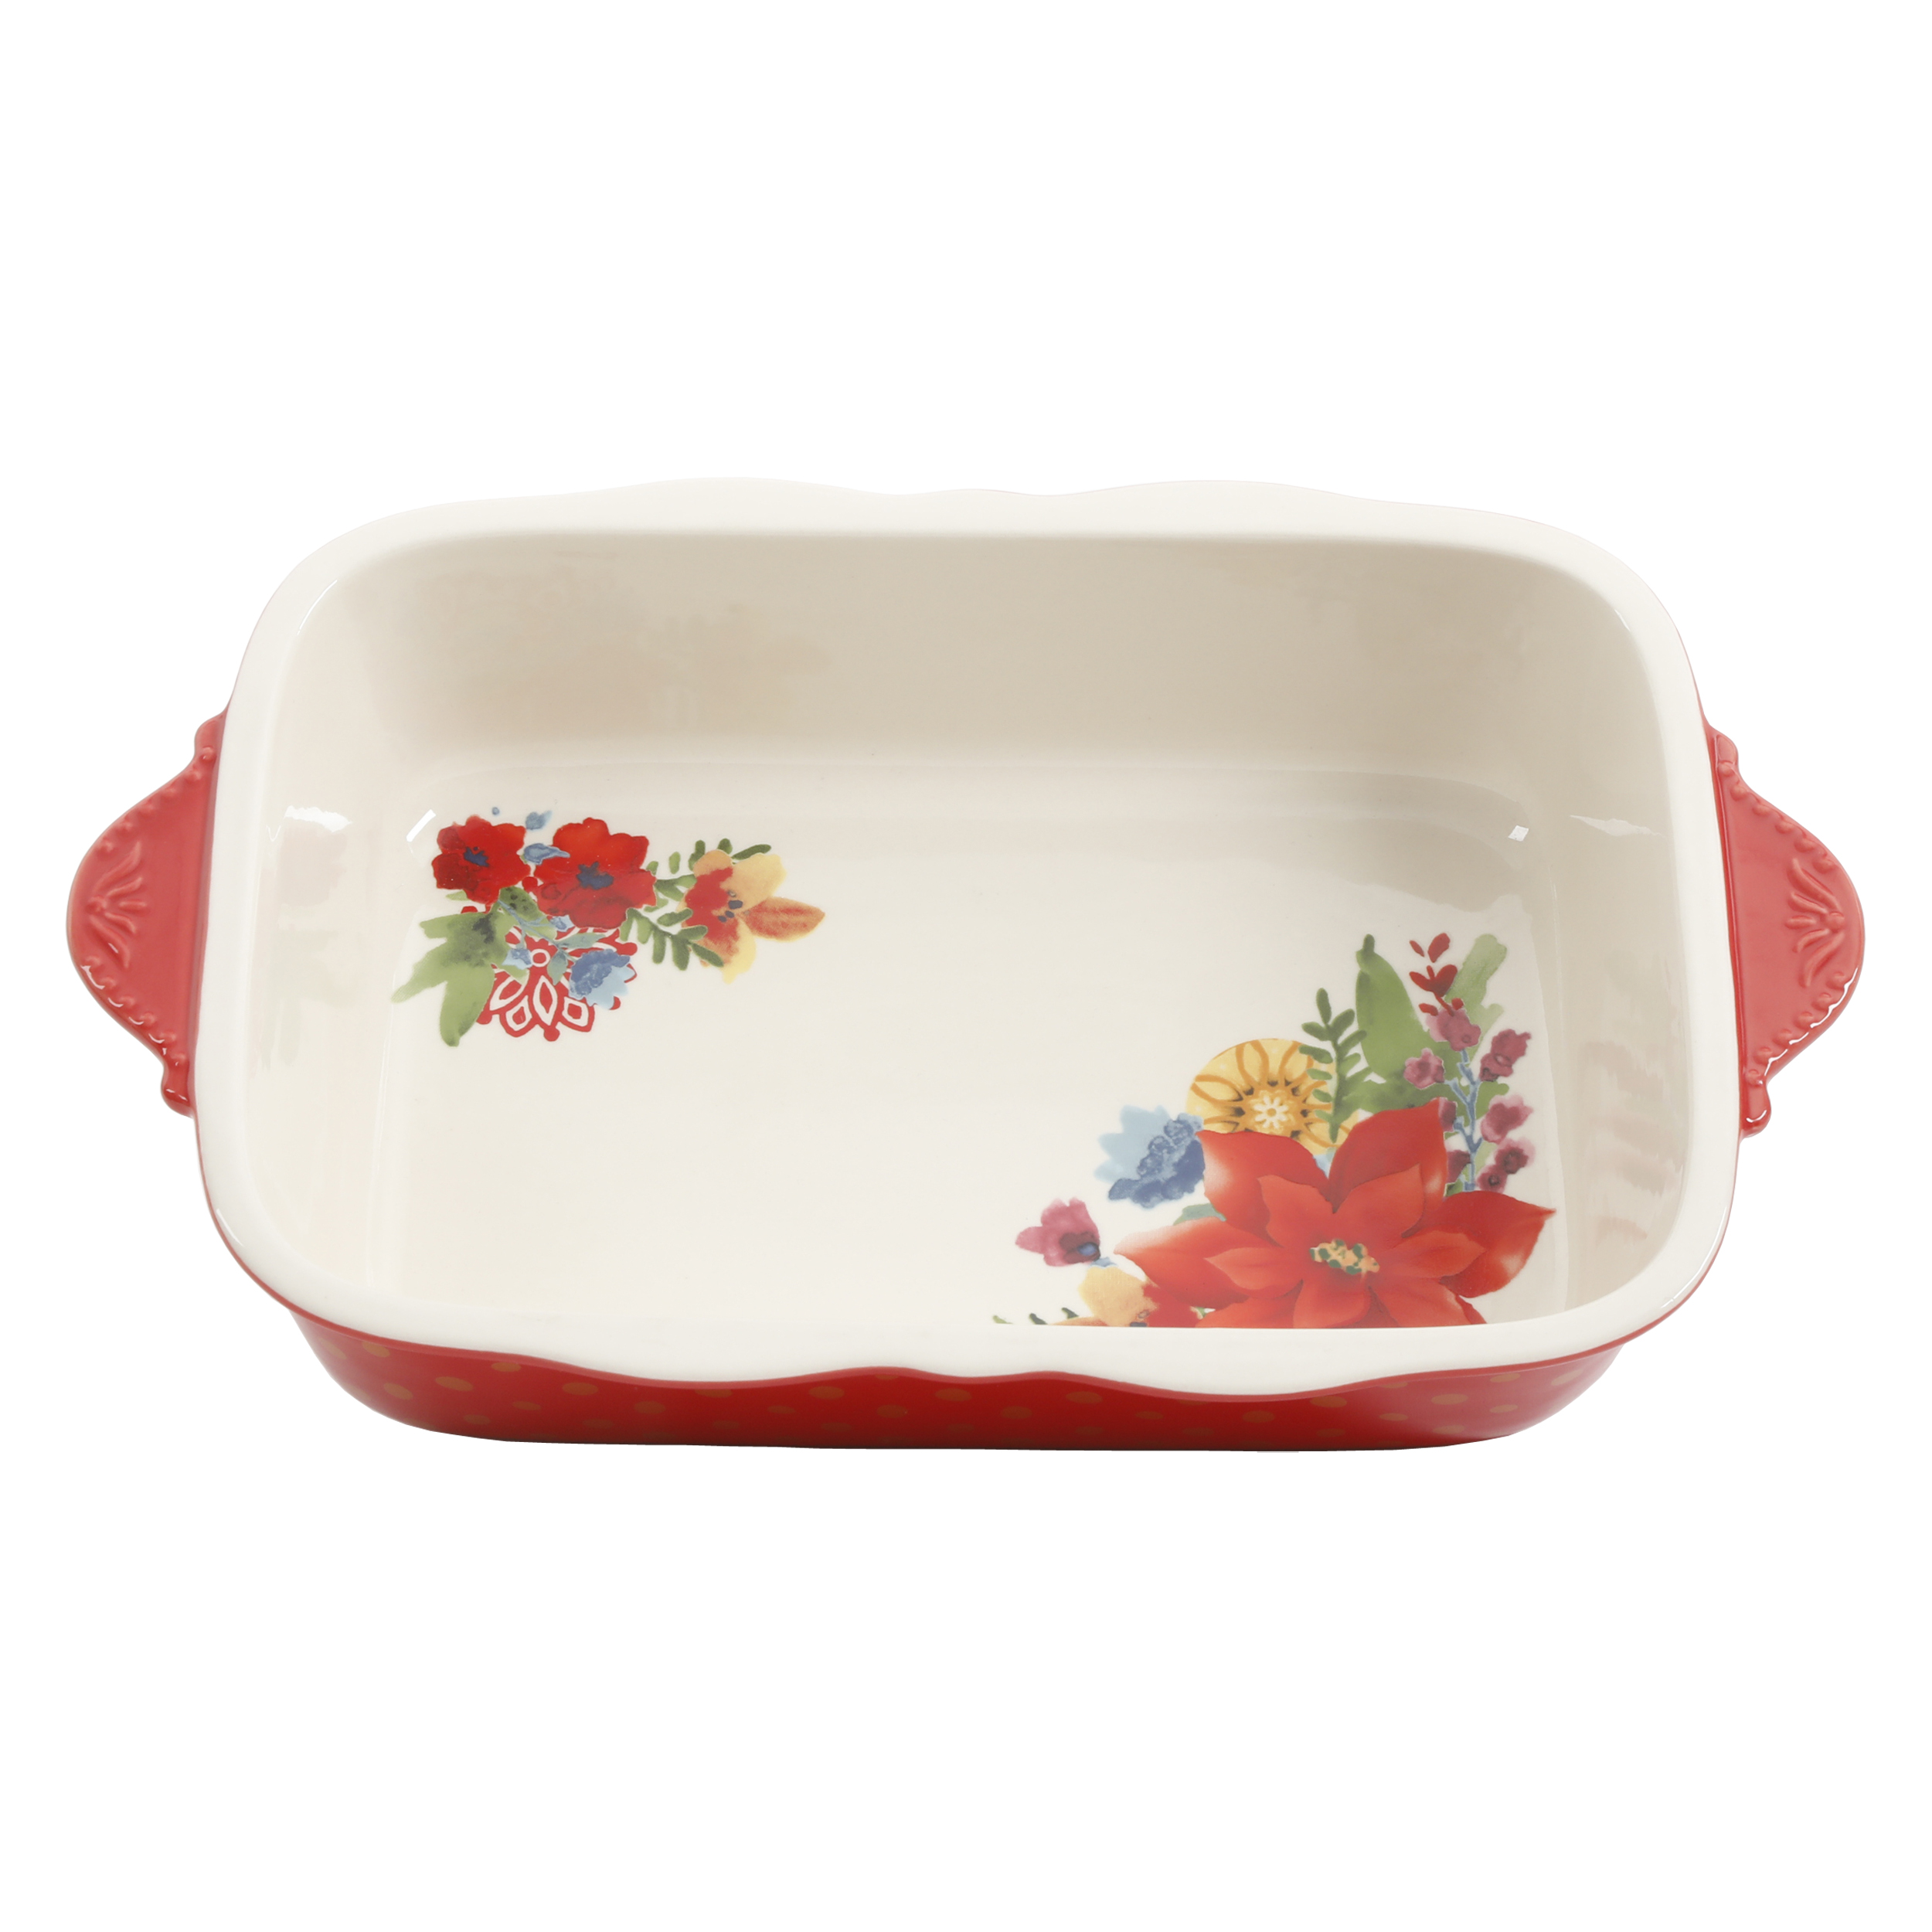 The Pioneer Woman Frost 2-Piece Bakeware Set - image 5 of 7